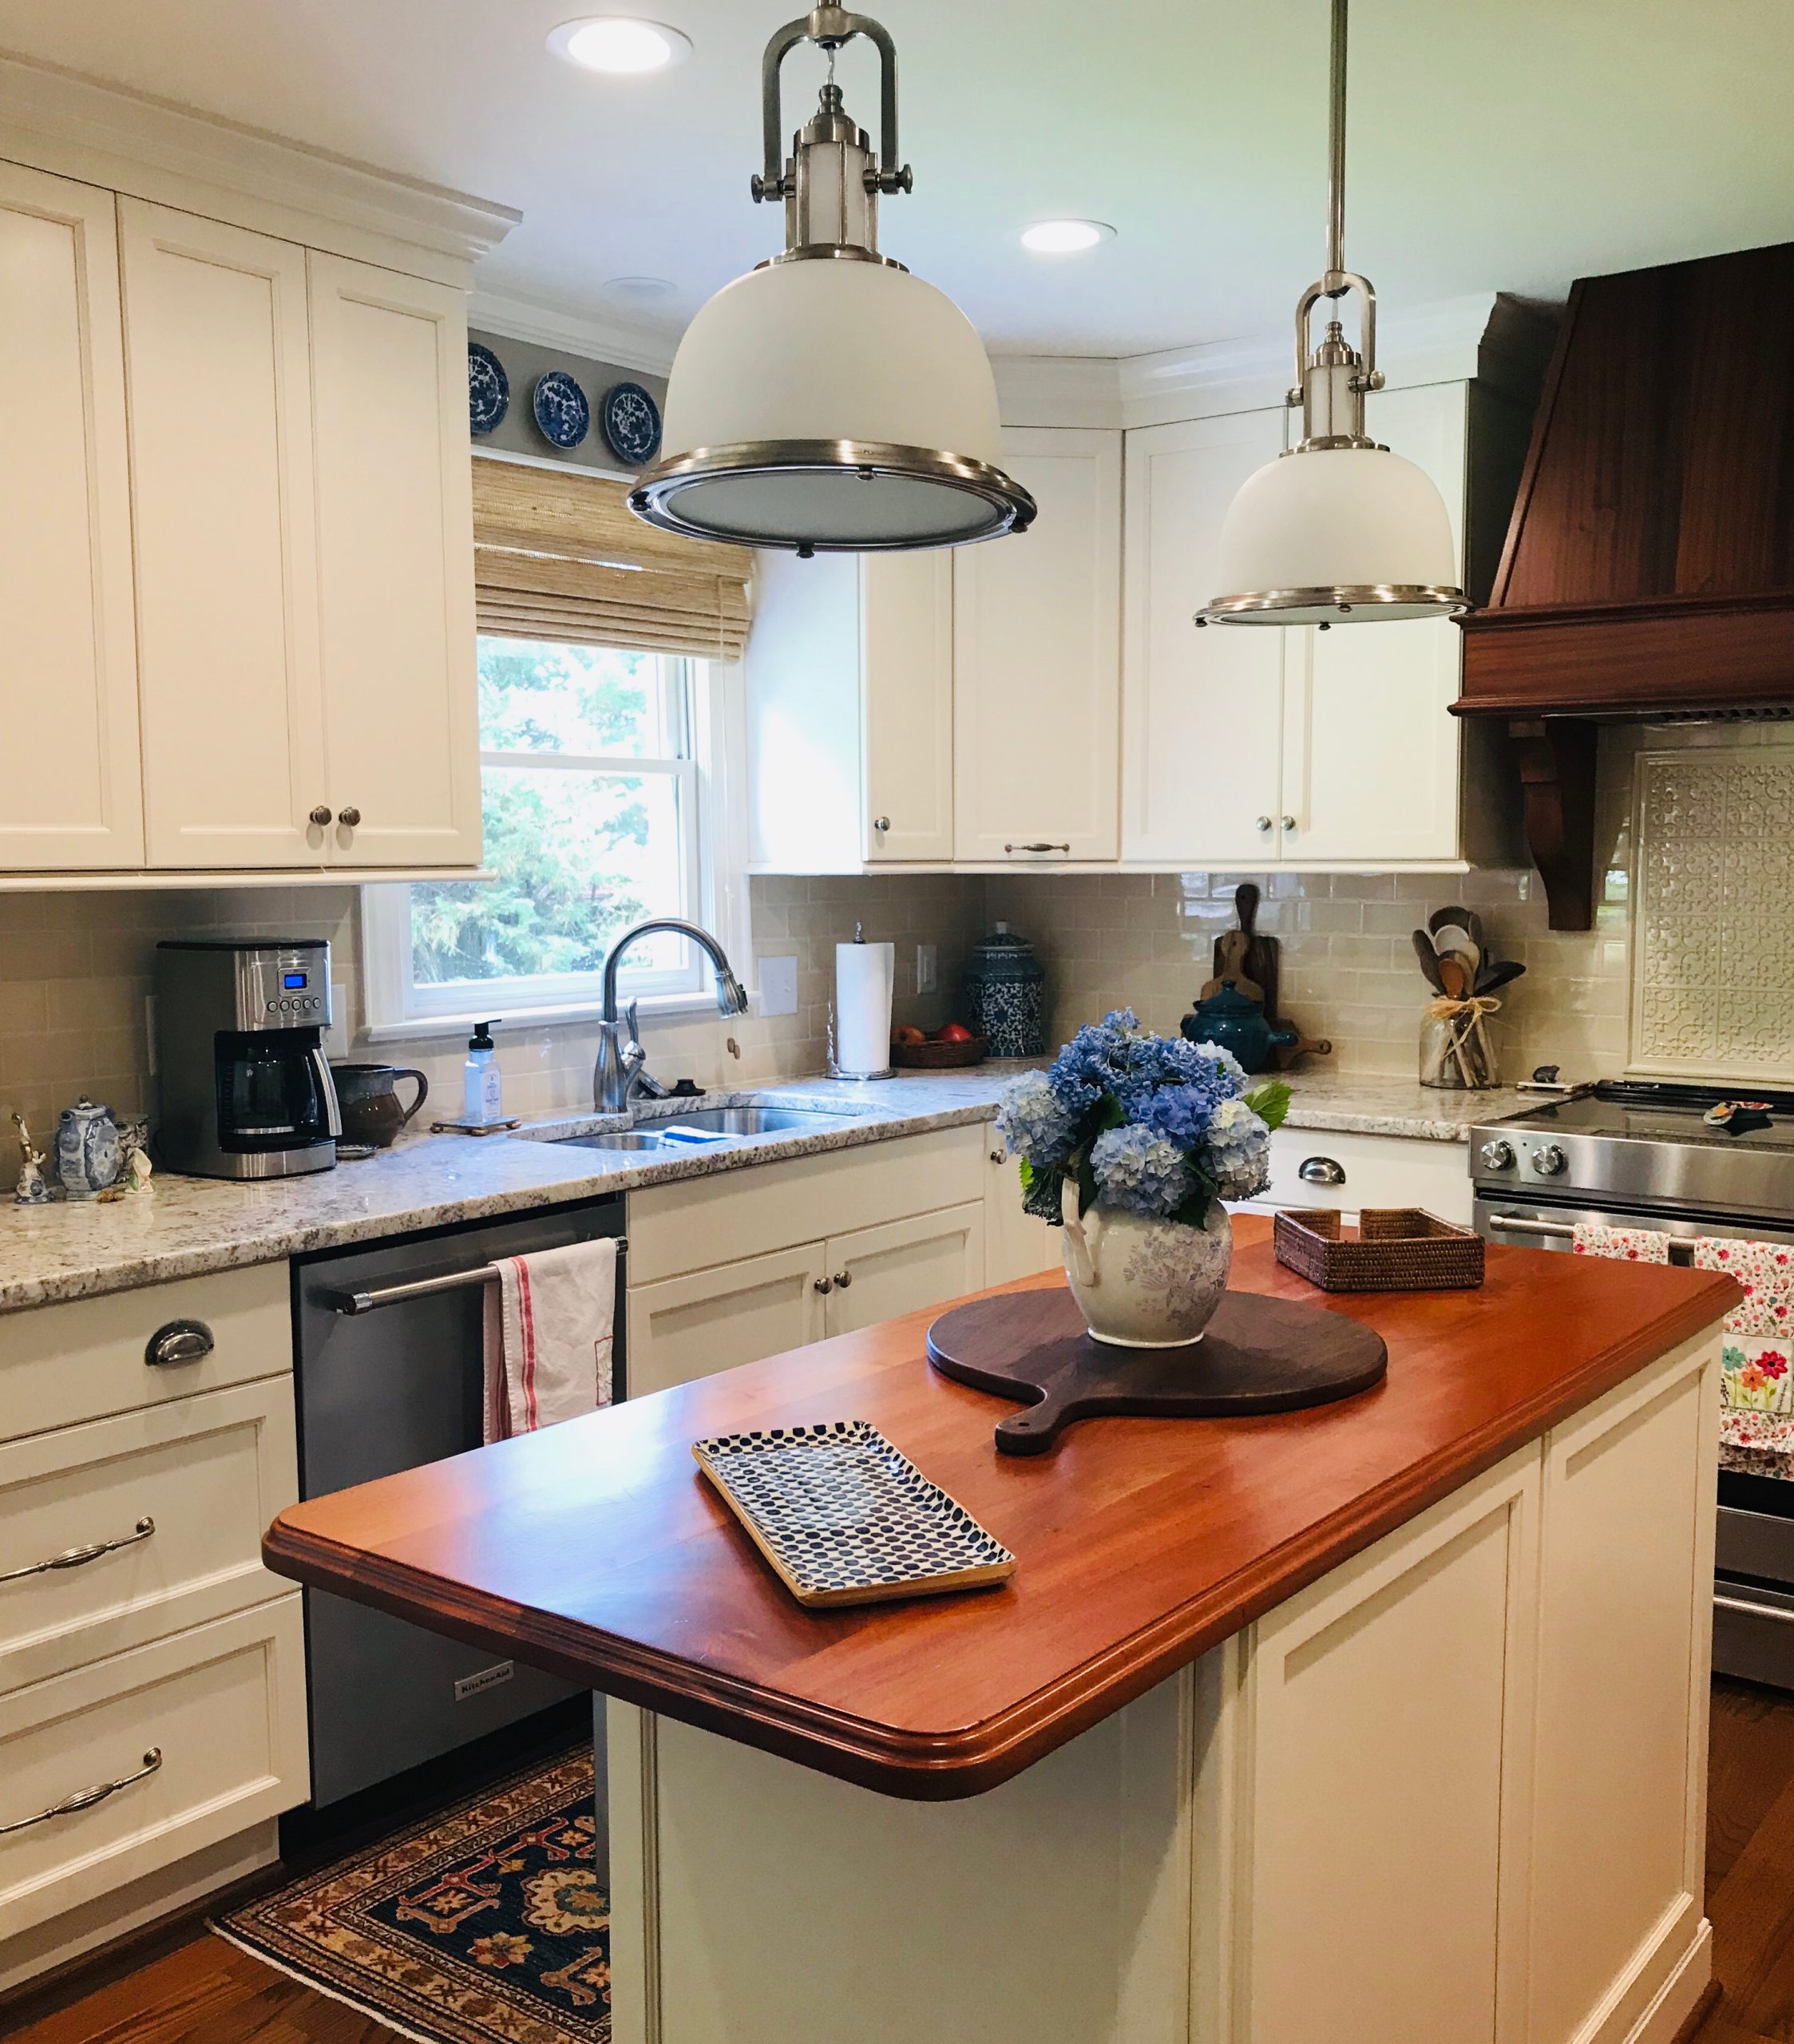 Kitchen island and countertop